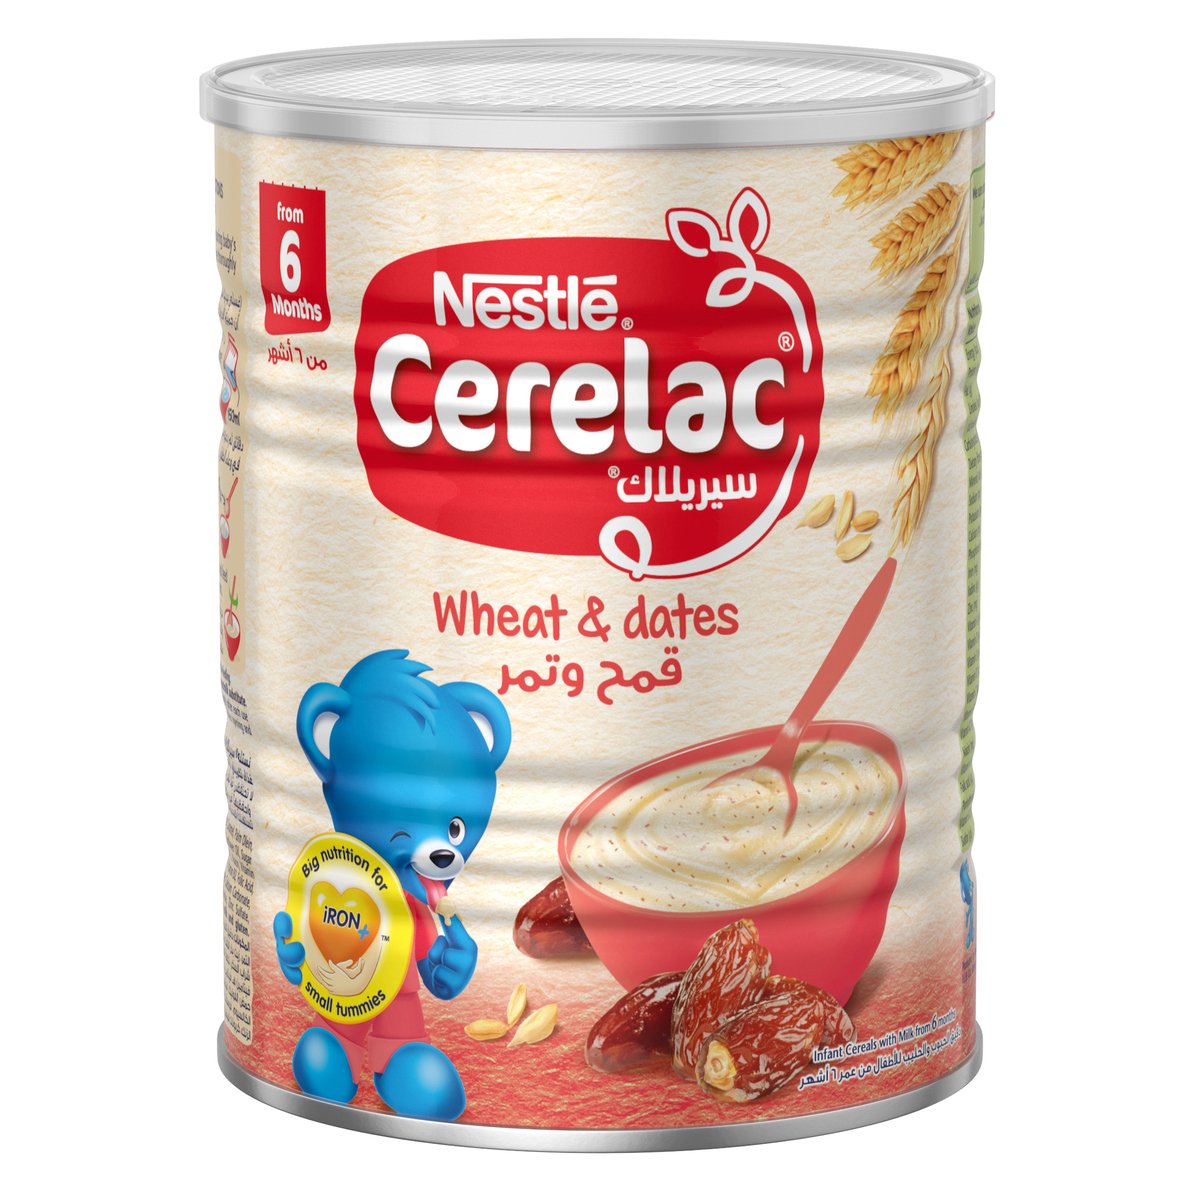 Buy Nestle Cerelac Wheat & Dates From 6 Months 400 g Online at Best Price | Baby Cereals | Lulu KSA in Saudi Arabia